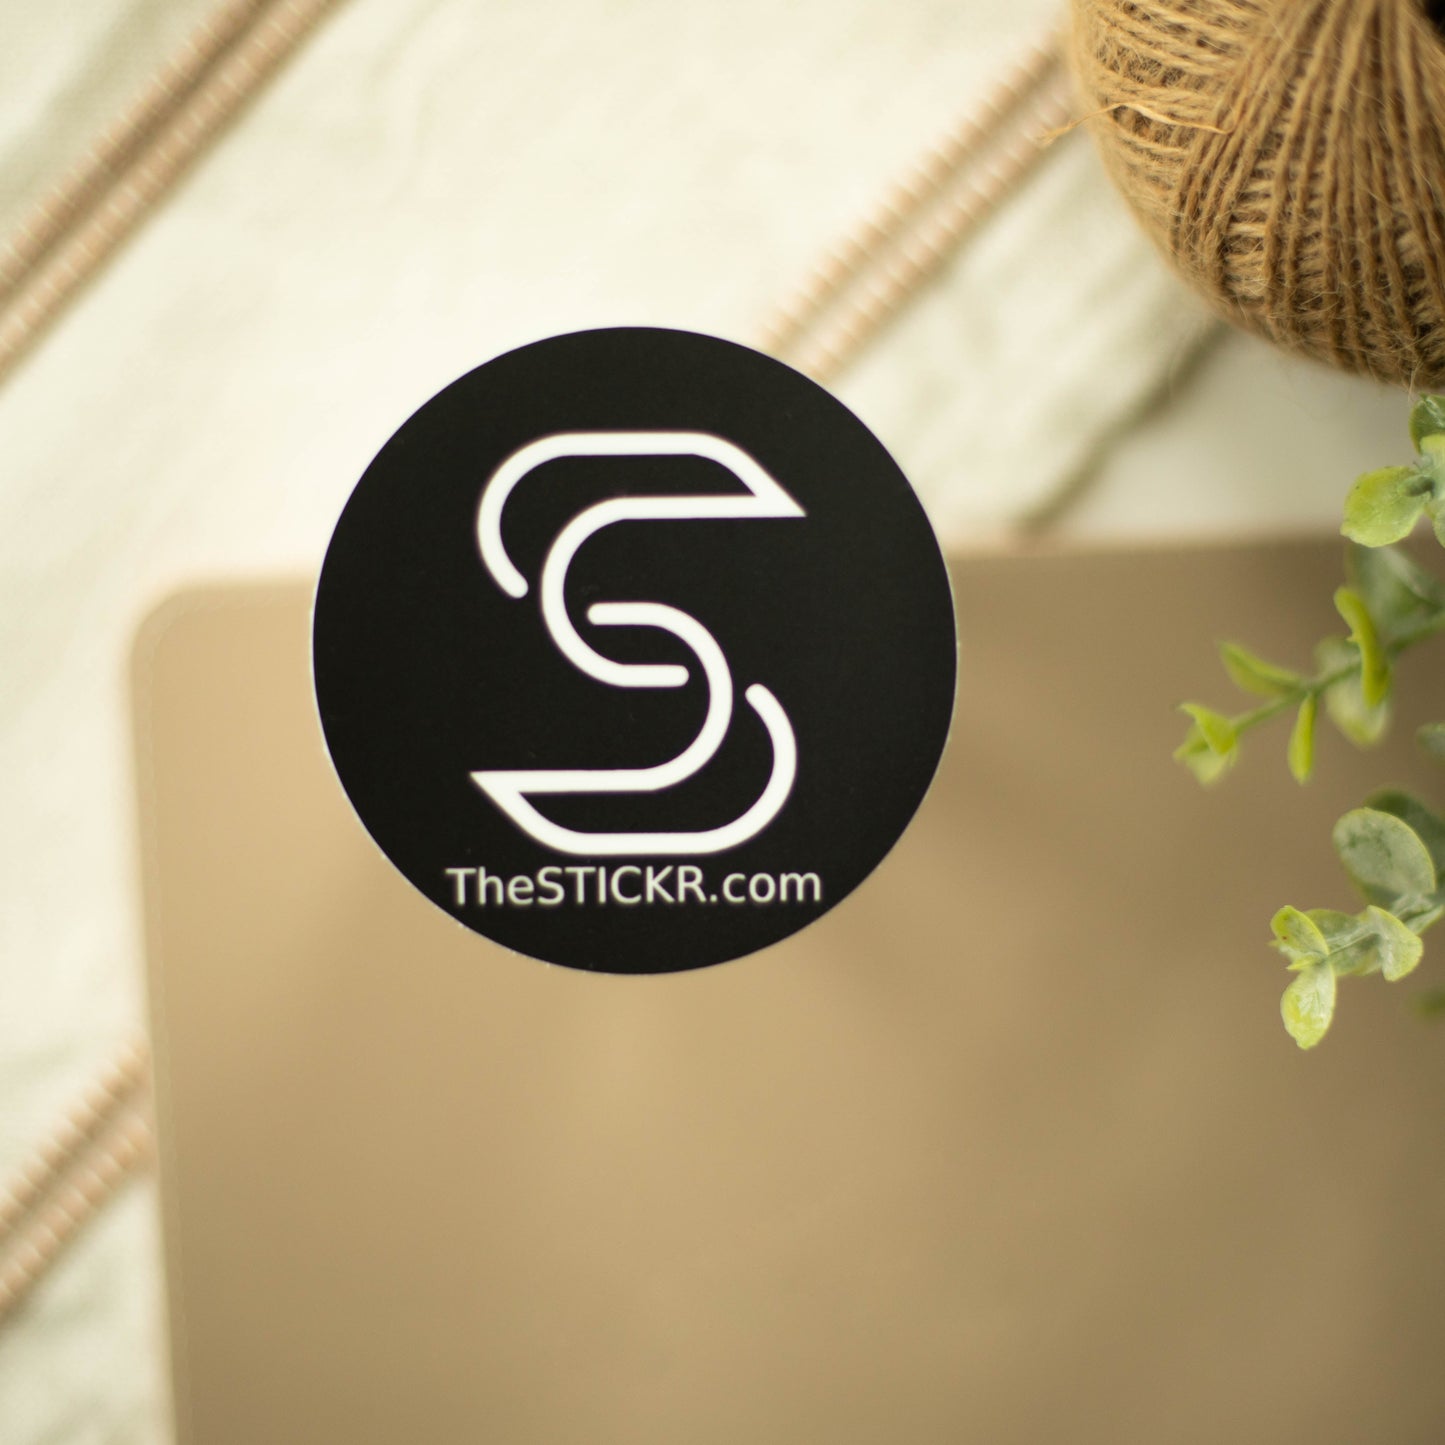 A circular black vinyl sitcker with the Stickr logo and website on a fancy background